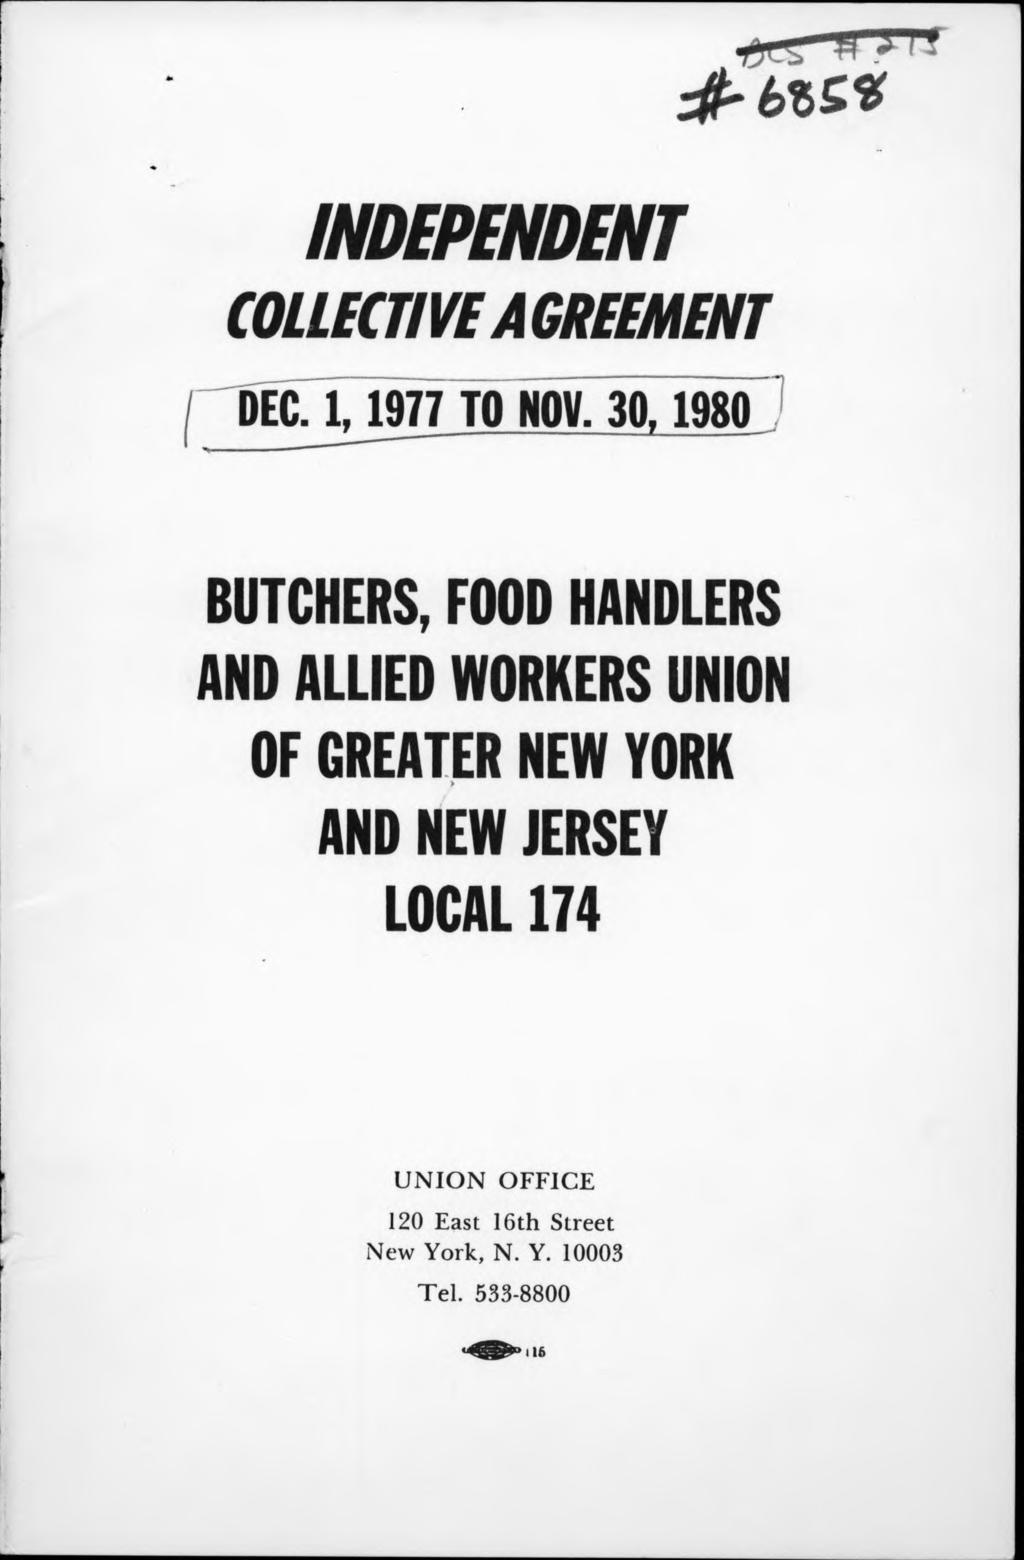 INDEPENDENT COLLECTIVE AGREEMENT r DEC. 1, 1977 TO NOV. 30.